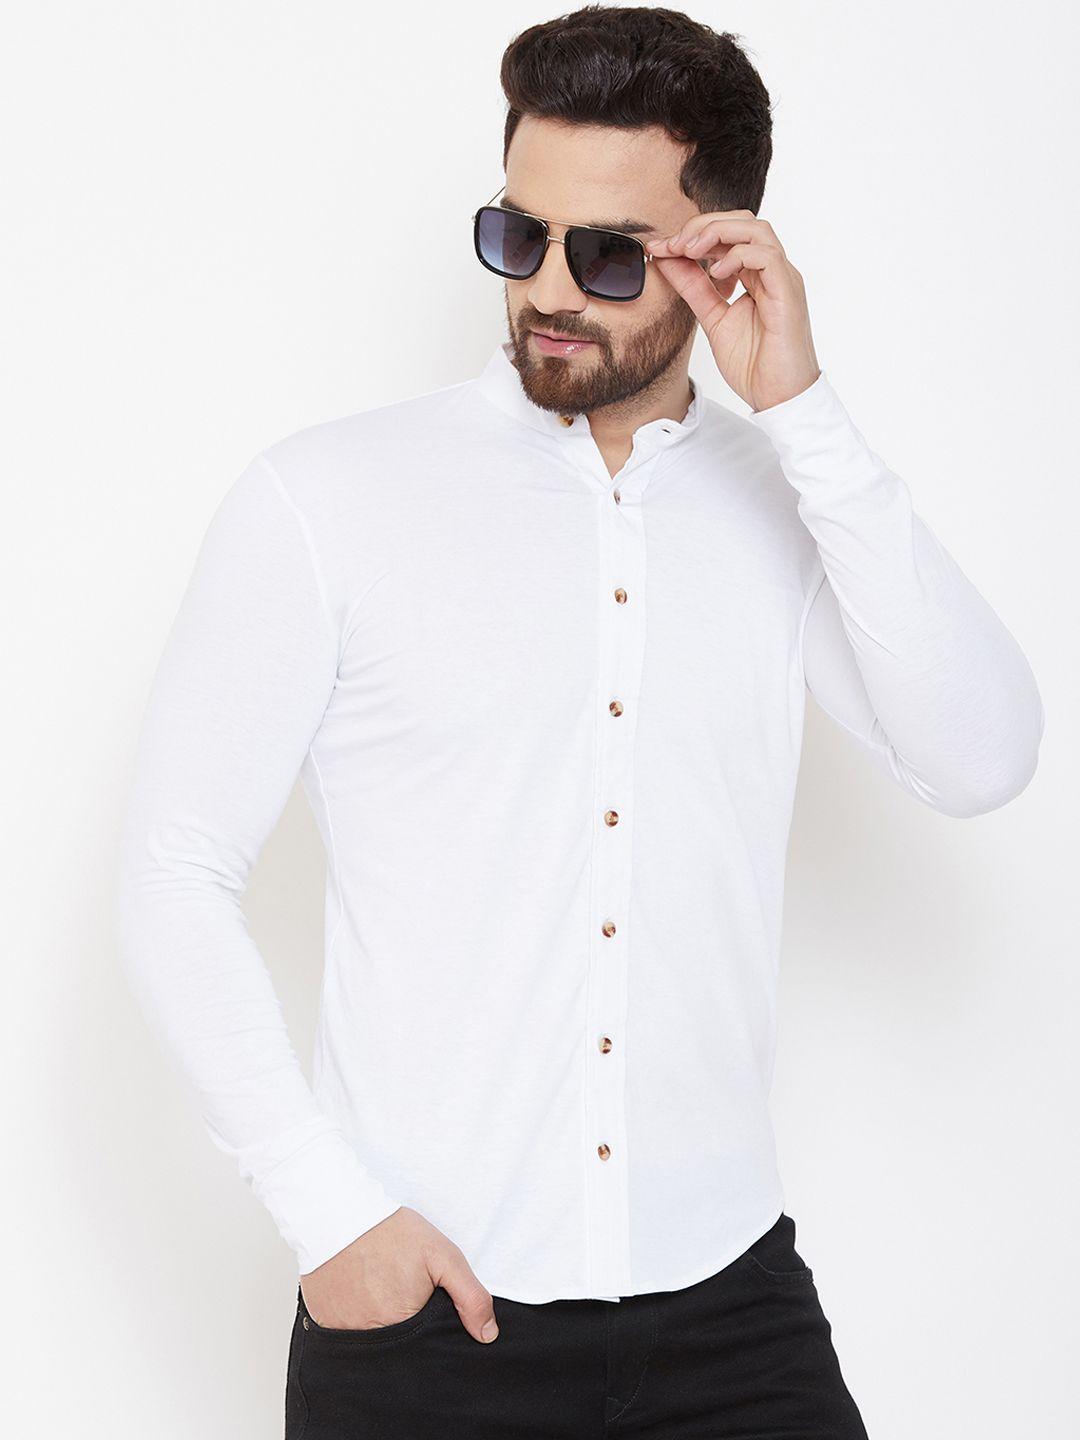 gespo men white slim fit solid casual shirt